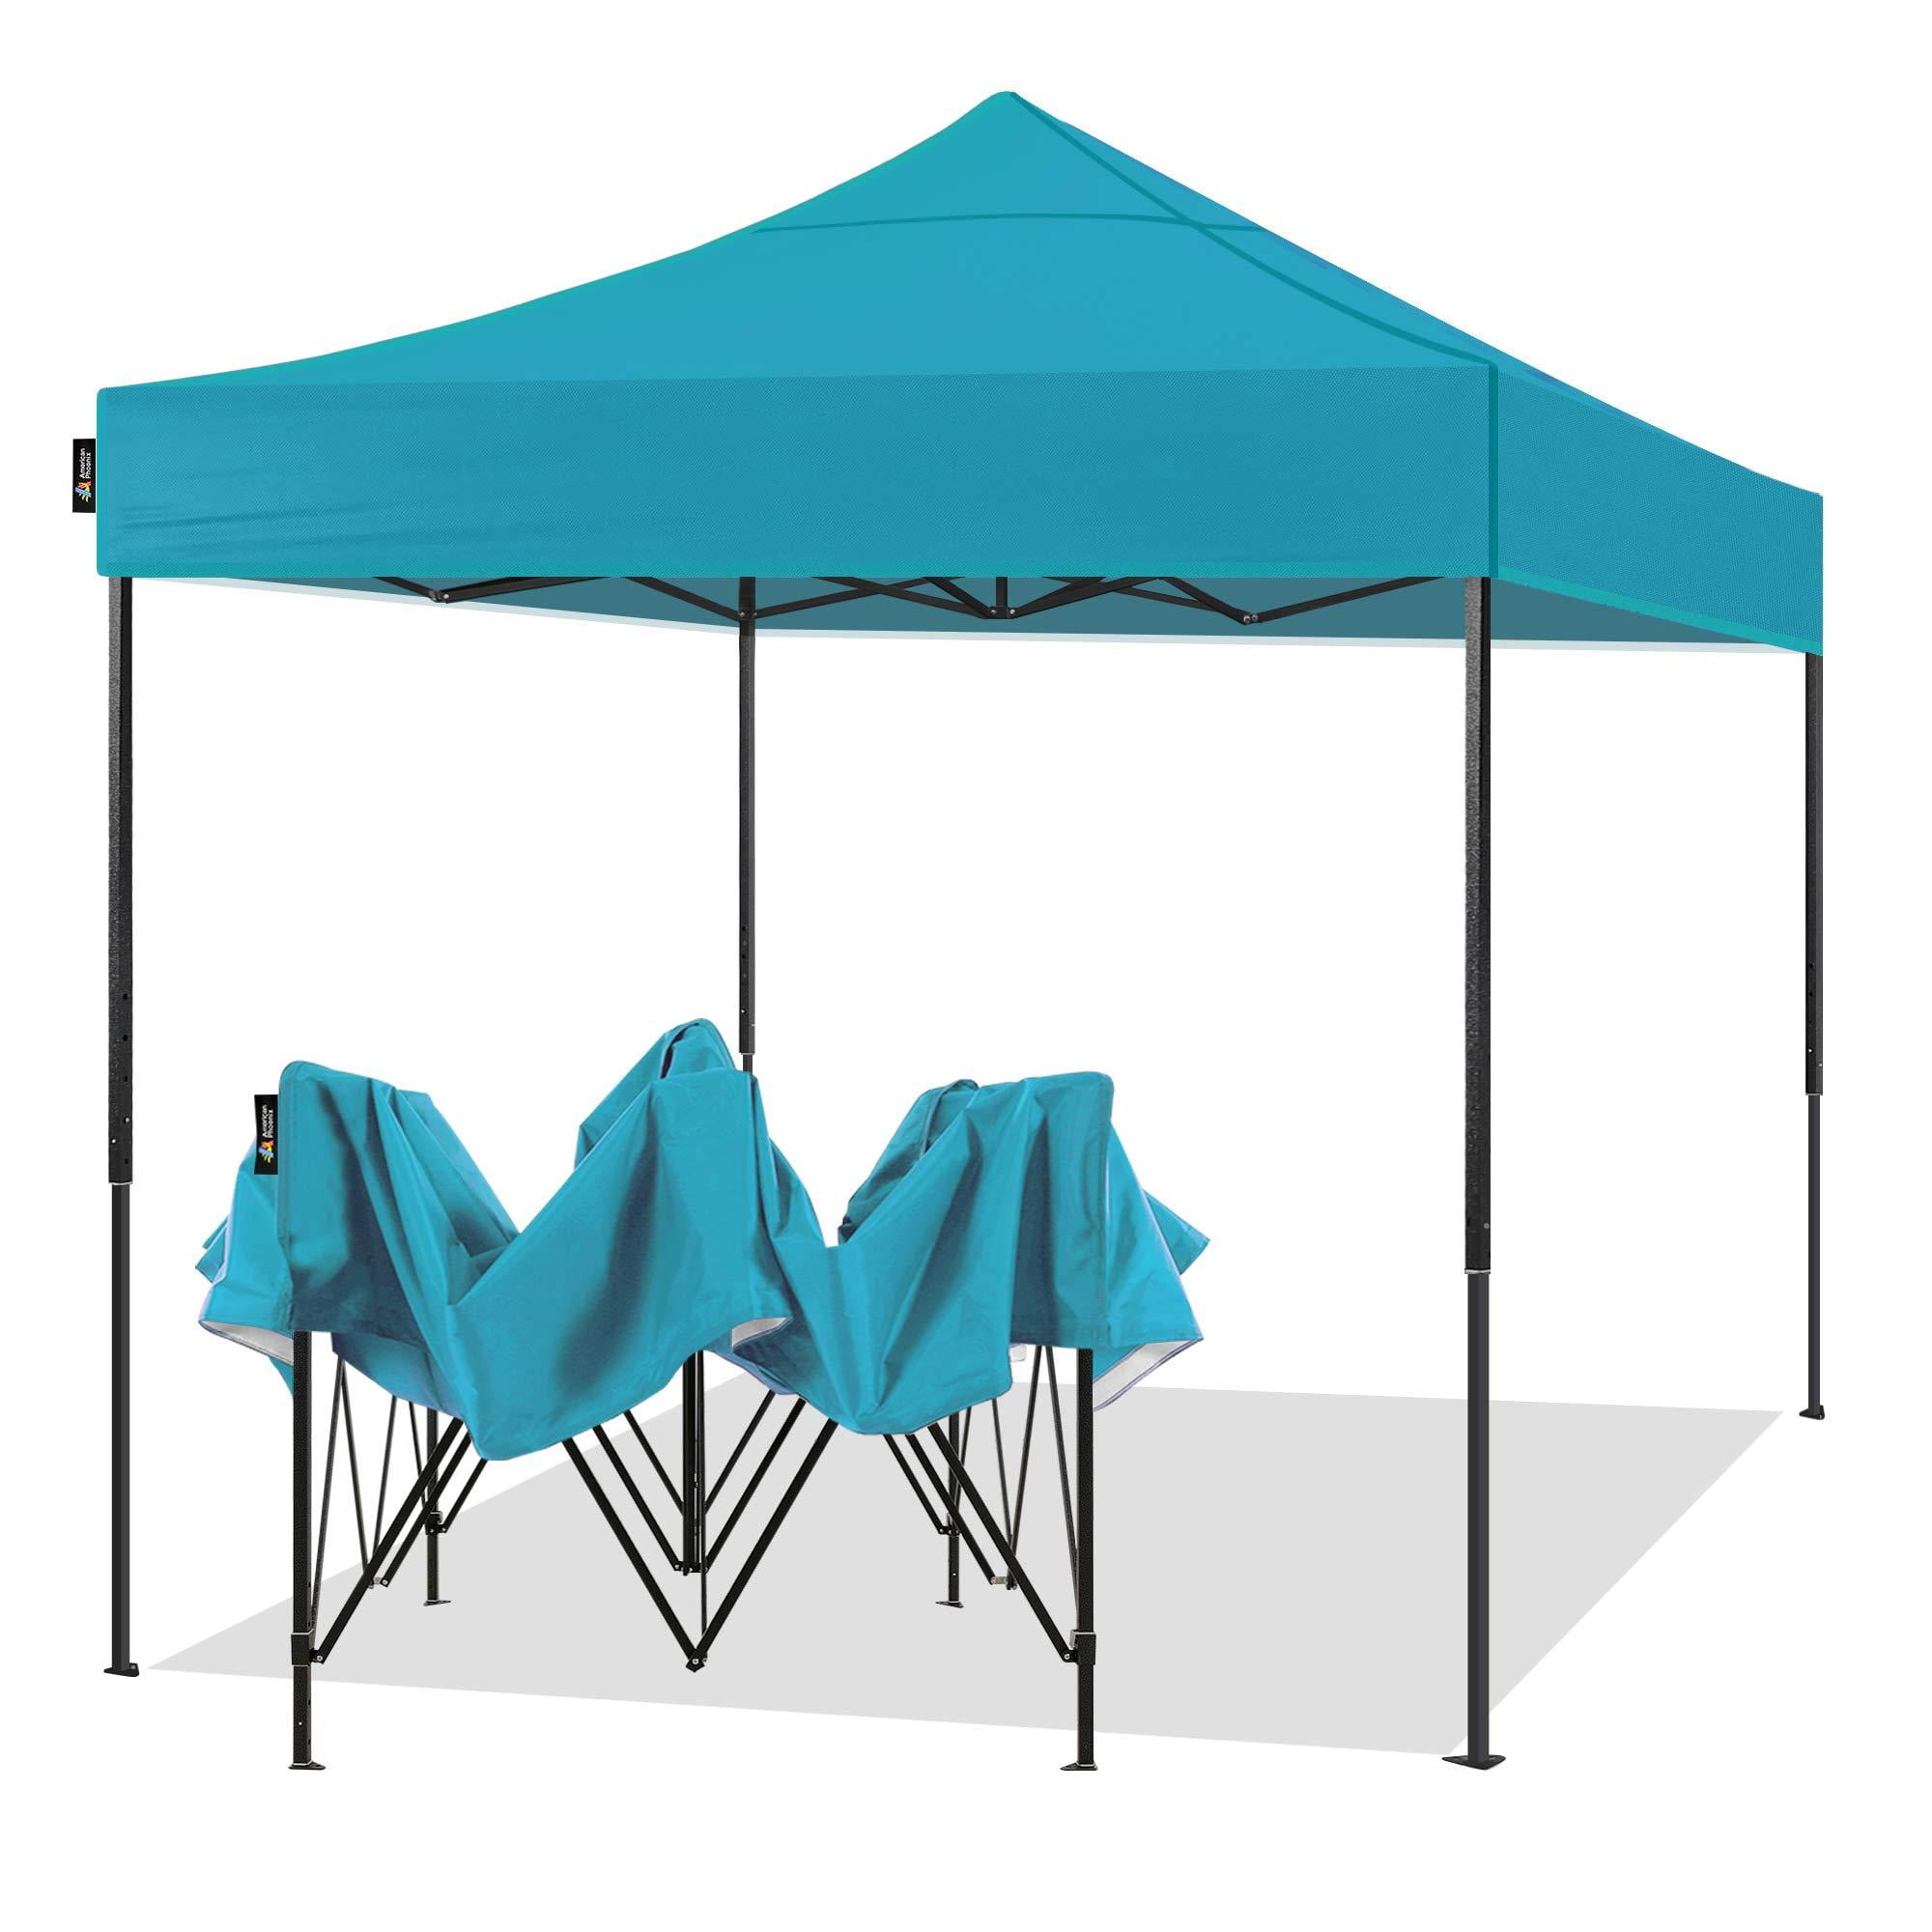 , Beige White Frame 10x10FT AMERICAN PHOENIX Pop Up Canopy Tent 10x10 Portable Instant Commercial Outdoor Beach Heavy Duty Market Shelter 